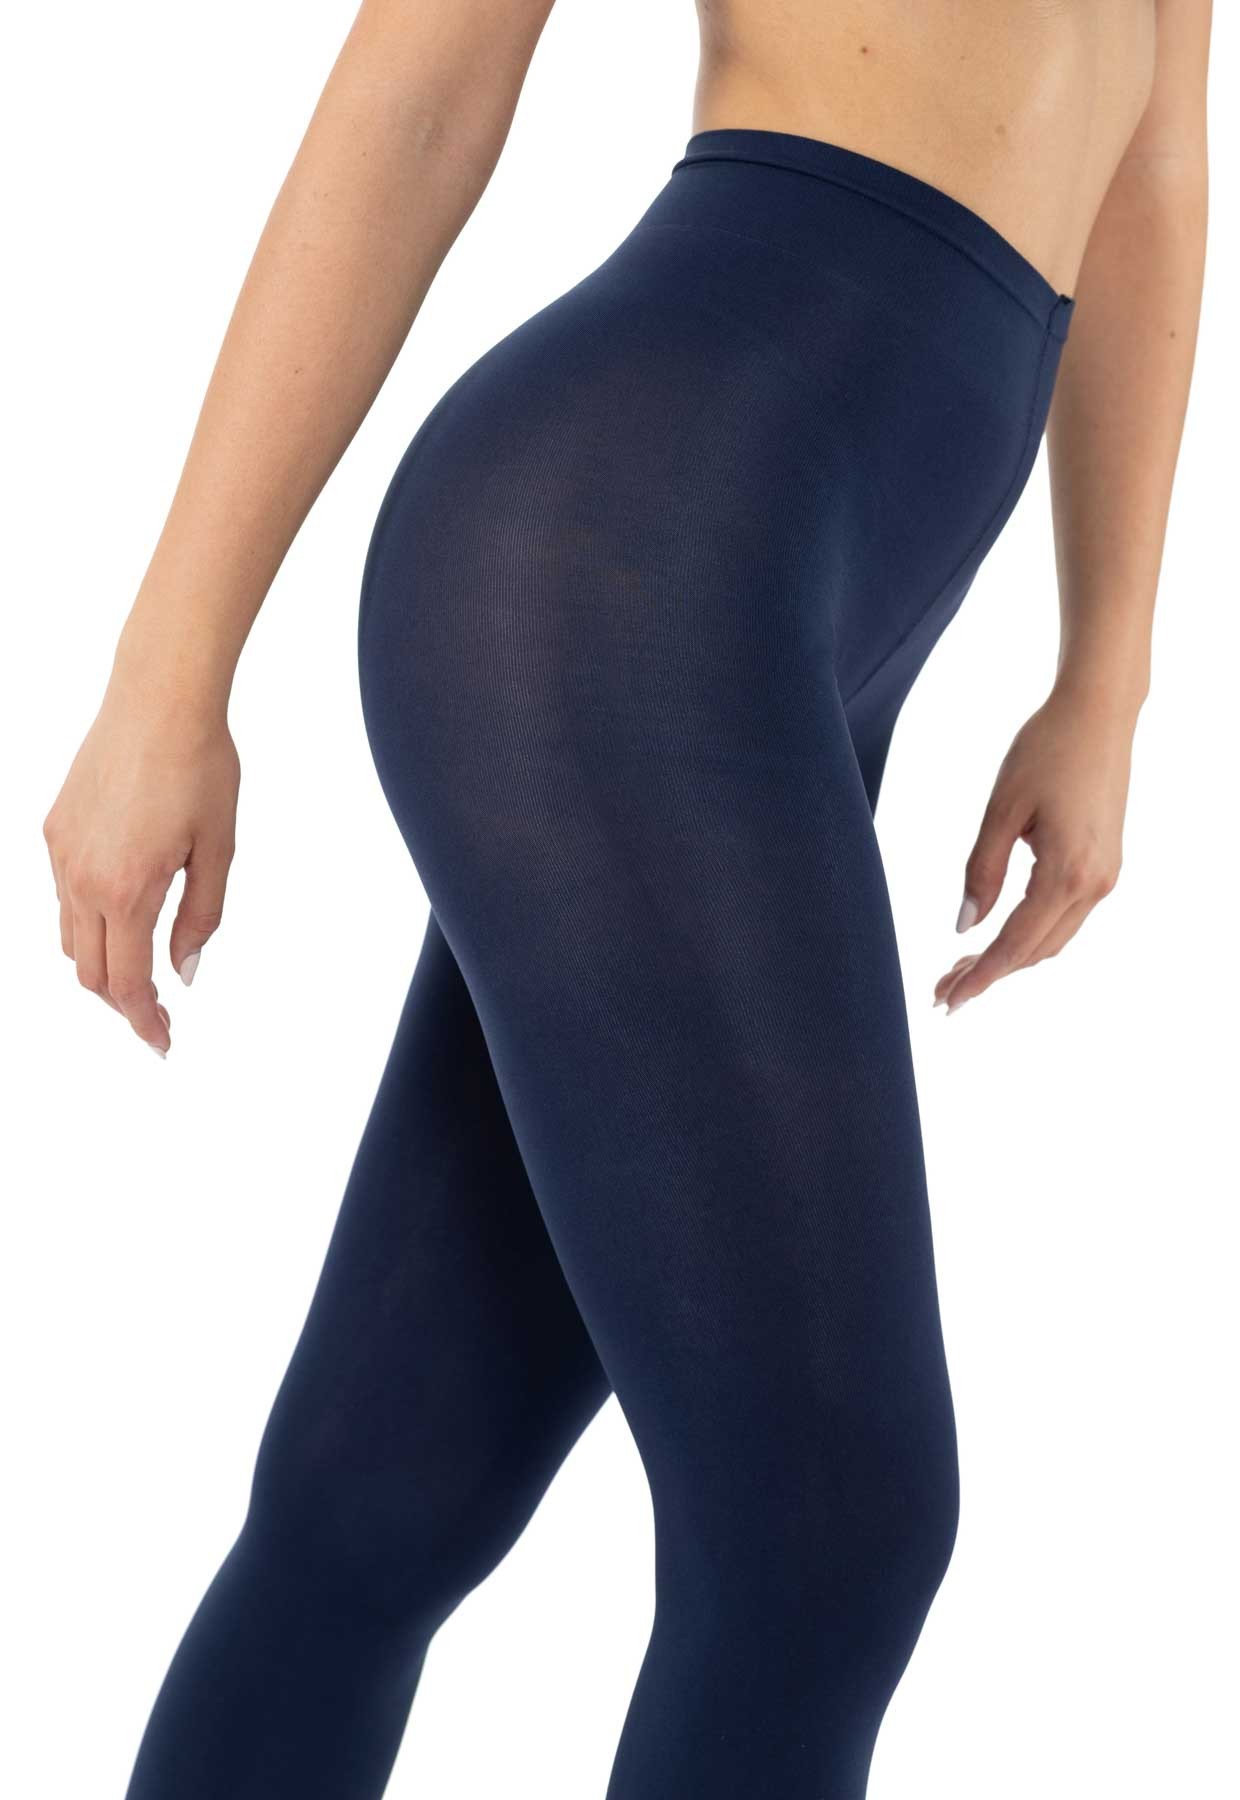 Opaque & Thermal TIghts